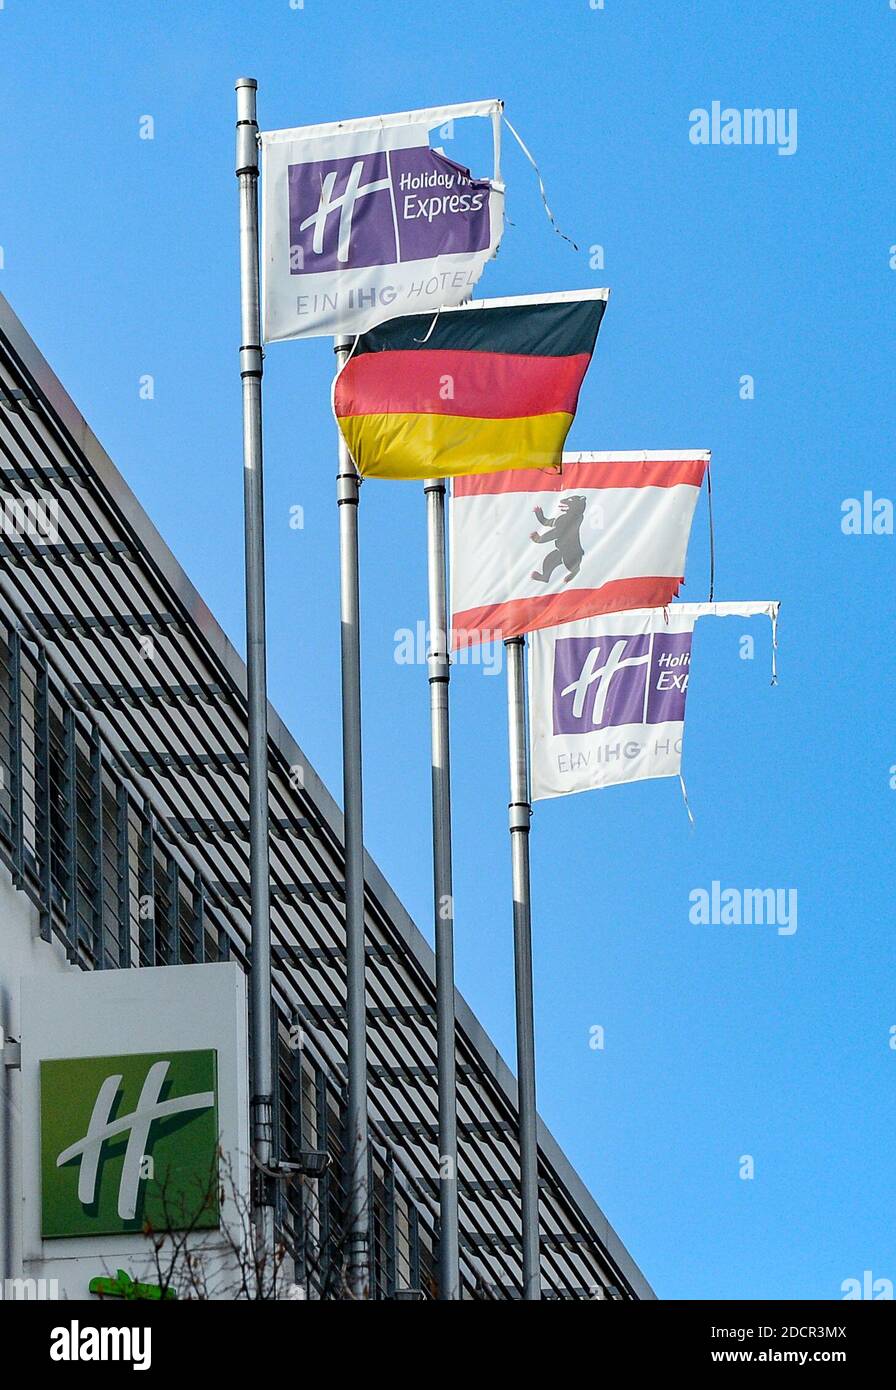 Berlin, Germany. 05th Nov, 2020. Flags on the building of the Hotel Holiday Inn Express Berlin City Centre on Stresemannstraße. You can see torn flags of the hotel chain, the German flag and the flag of Berlin. Holiday Inn is an American hotel brand in British ownership and a subsidiary of the InterContinental Hotels Group. Founded as a US hotel chain, it has developed into one of the largest hotel chains in the world. Credit: Jens Kalaene/dpa-Zentralbild/ZB/dpa/Alamy Live News Stock Photo